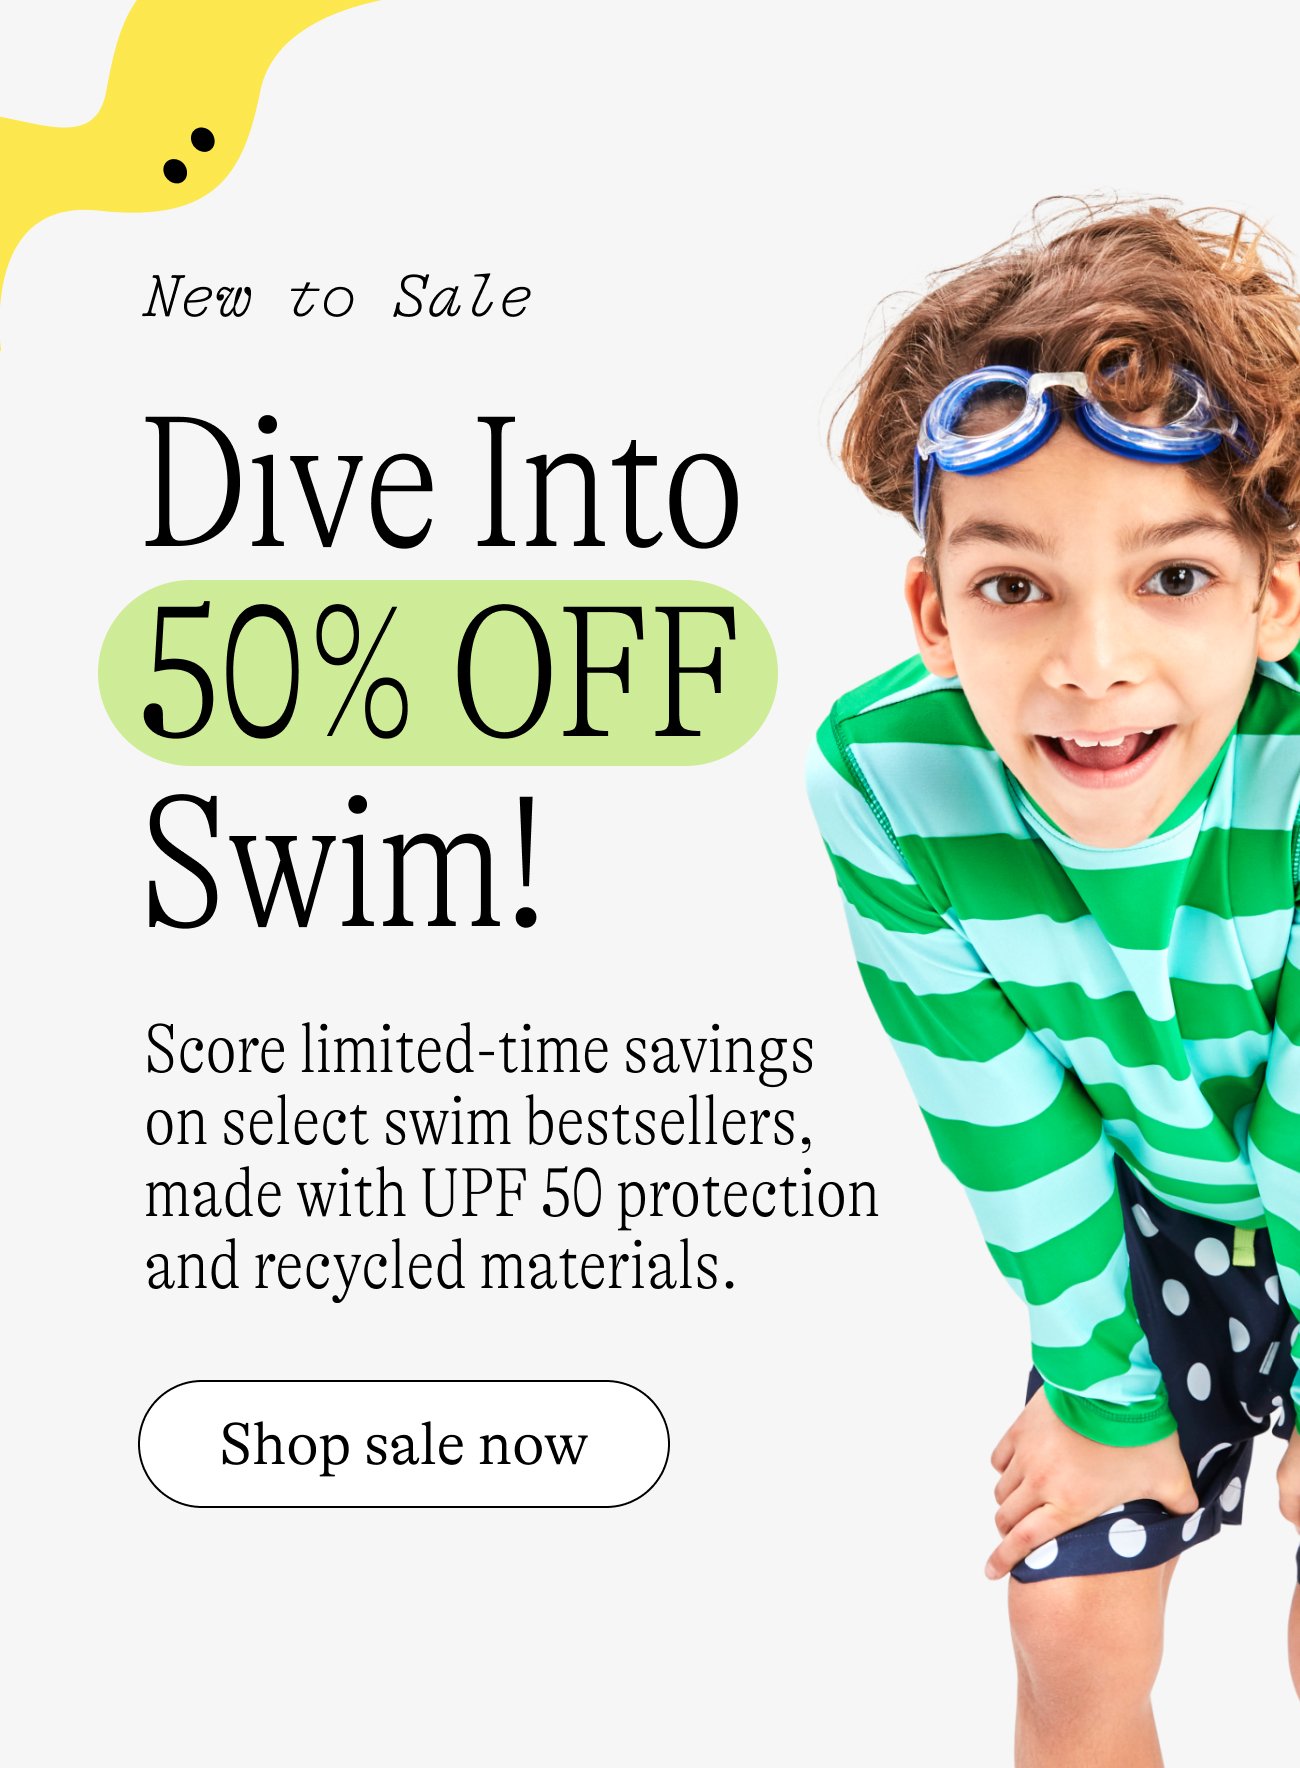 New to Sale: Dive Into 50% OFF Swim! Score limited-time savings  on select swim bestsellers, made with UPF 50 protection and recycled materials.